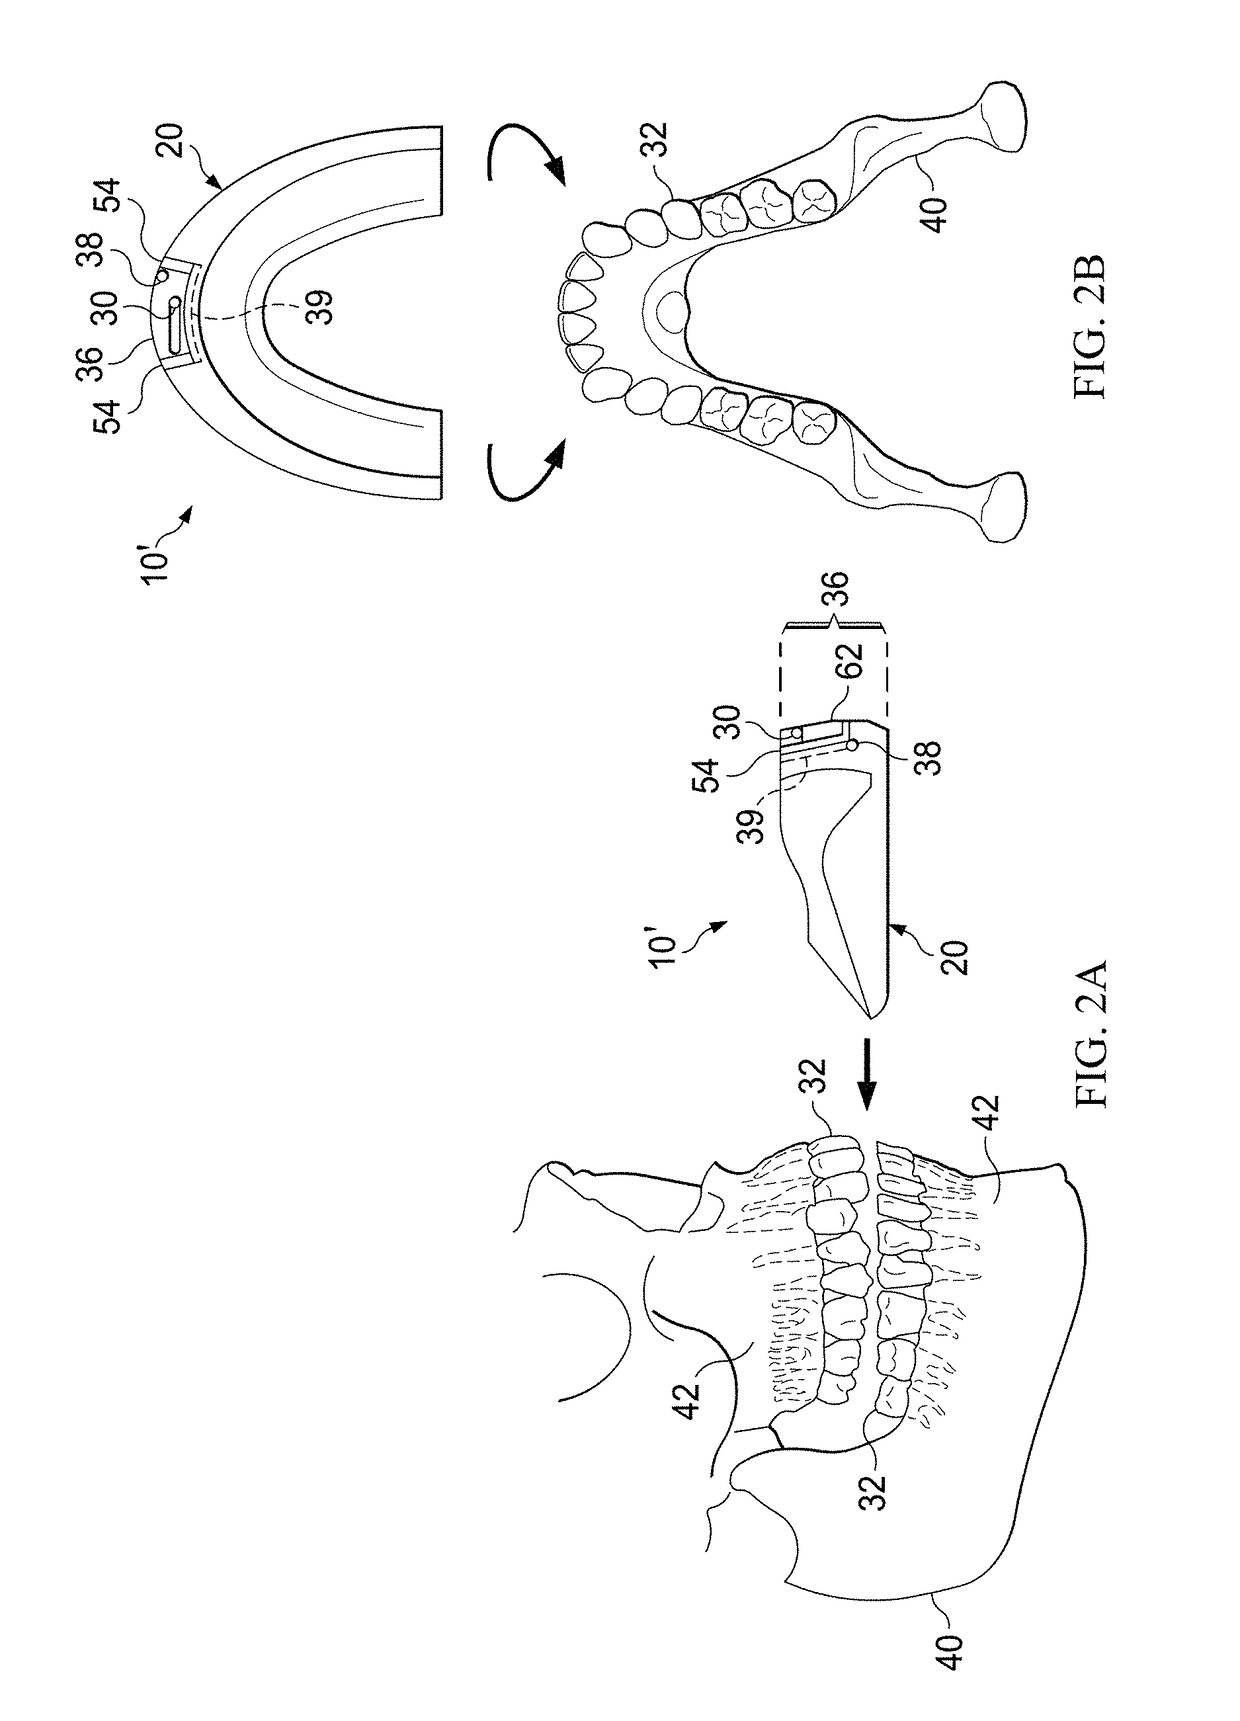 Pulsatile orthodontic device and methods